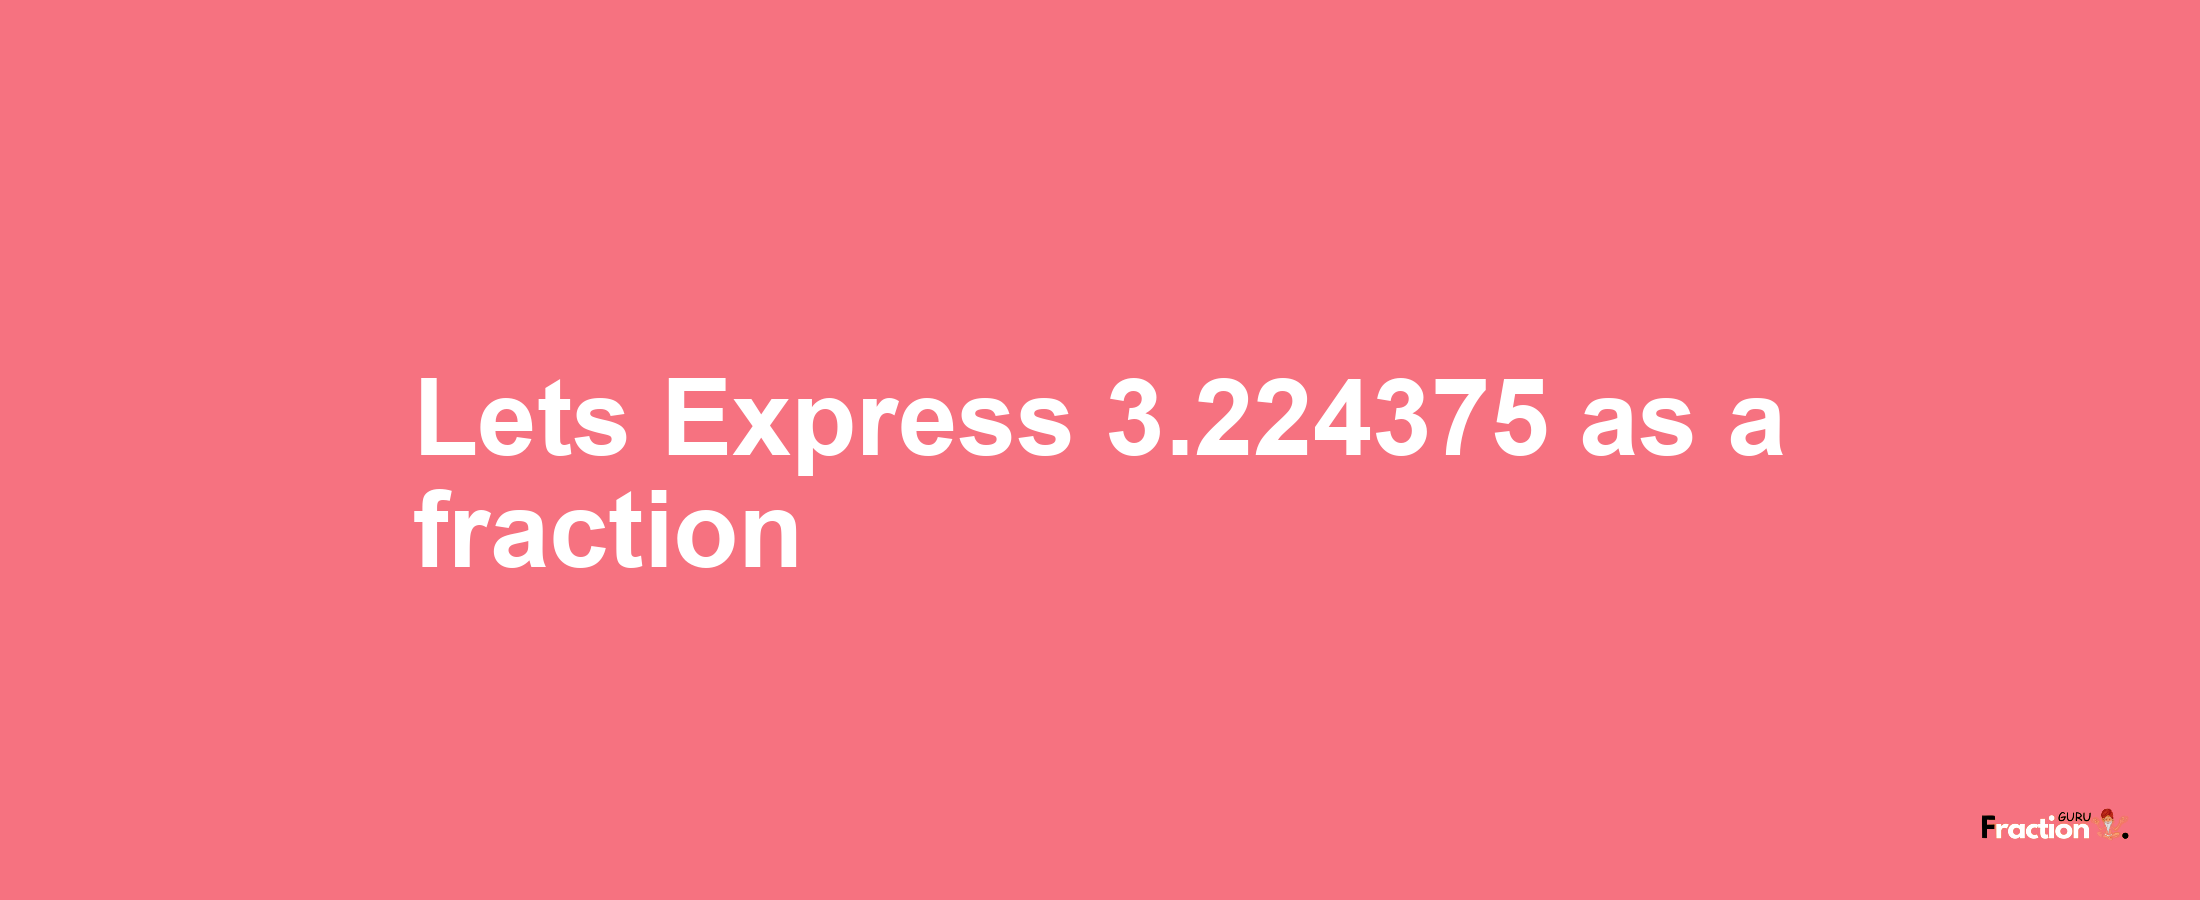 Lets Express 3.224375 as afraction